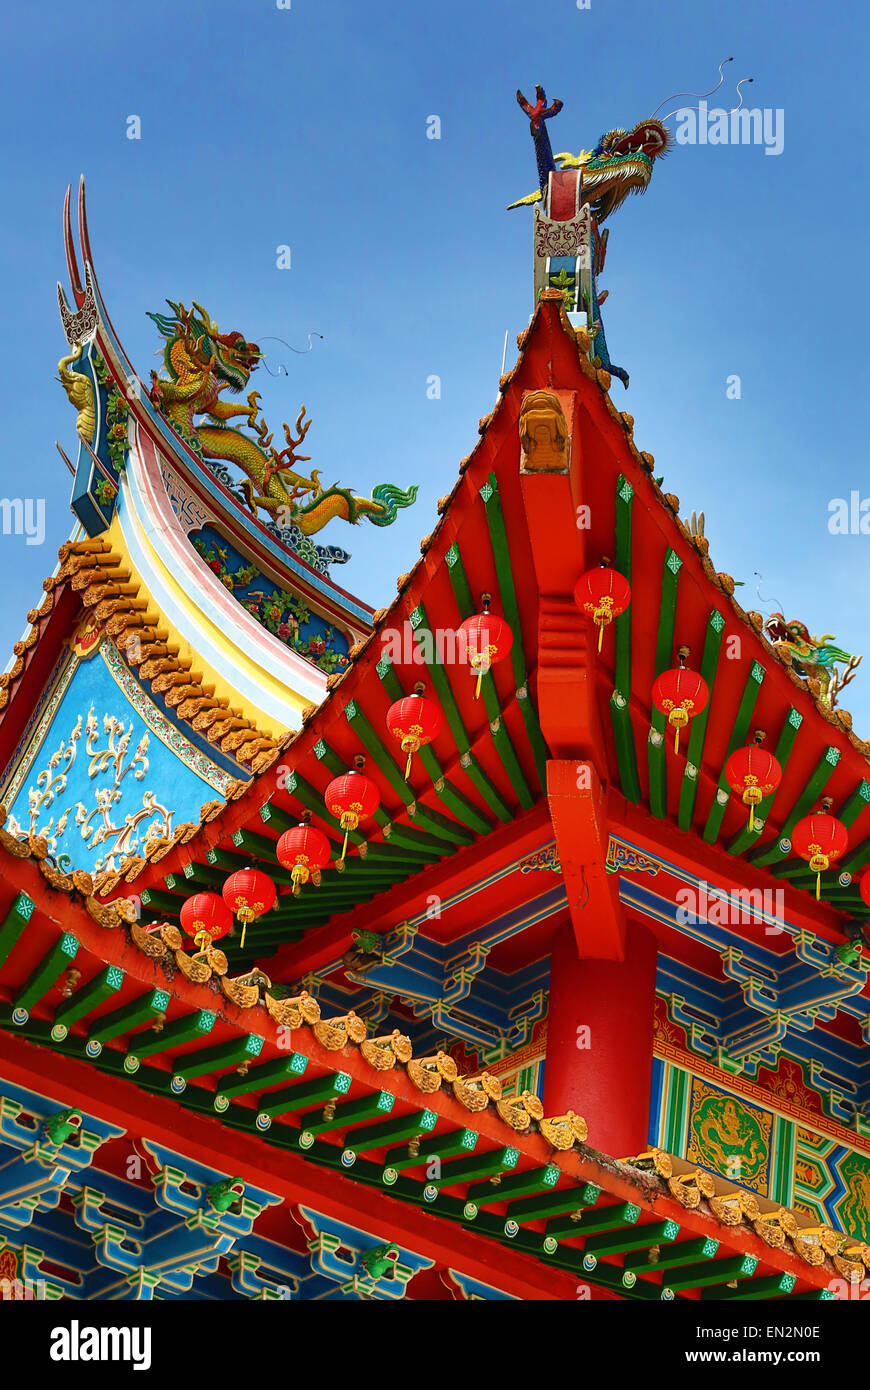 Red lanterns and dragon roof decorations on the Thean Hou Chinese Temple, Kuala Lumpur, Malaysia Stock Photo